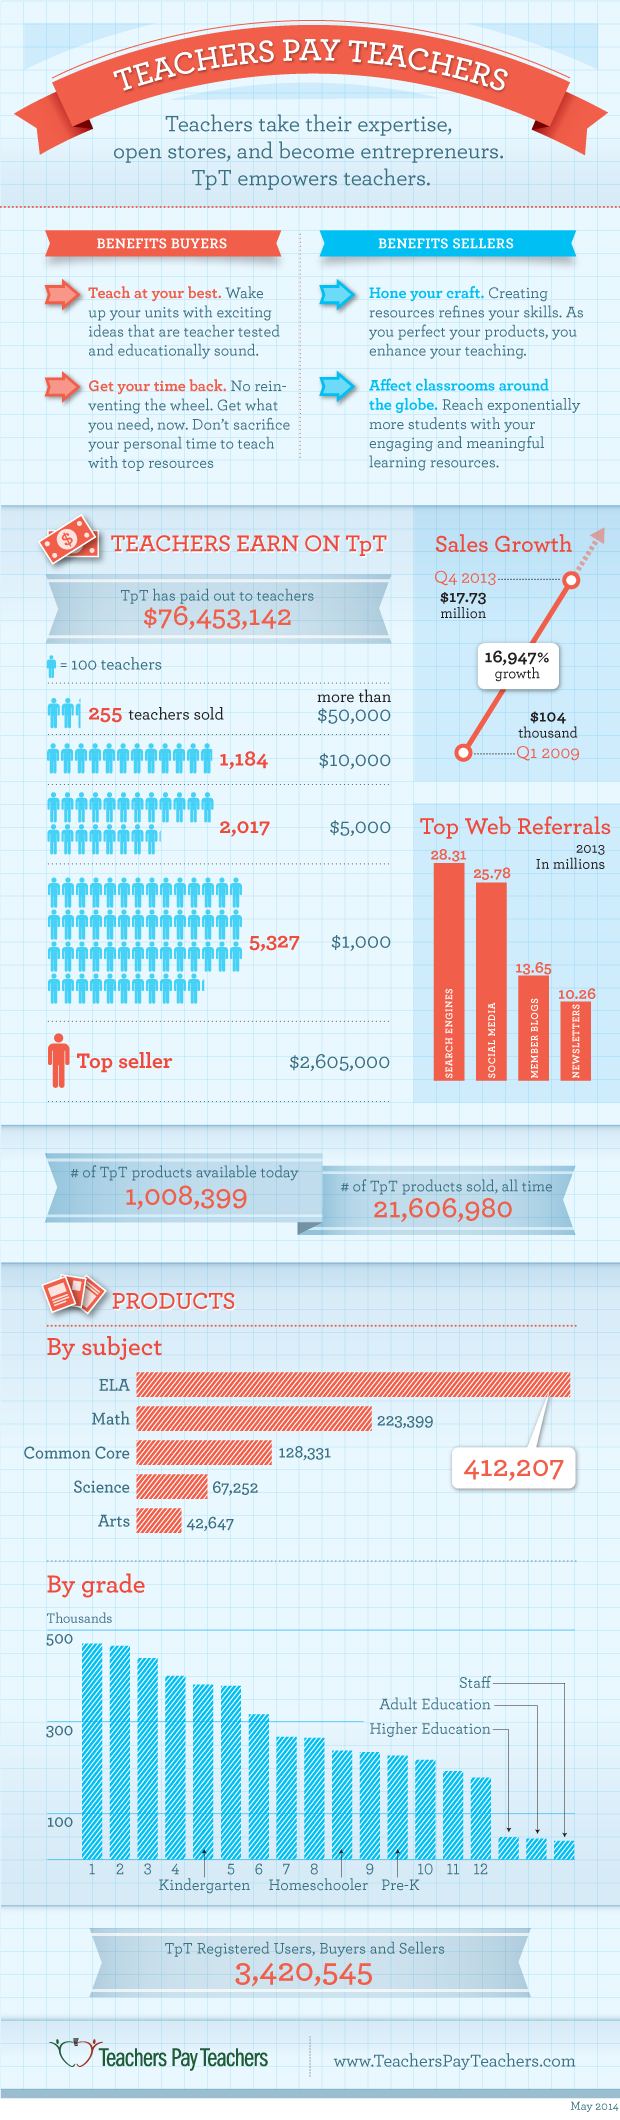 Teachers Pay Teachers by the numbers graphic